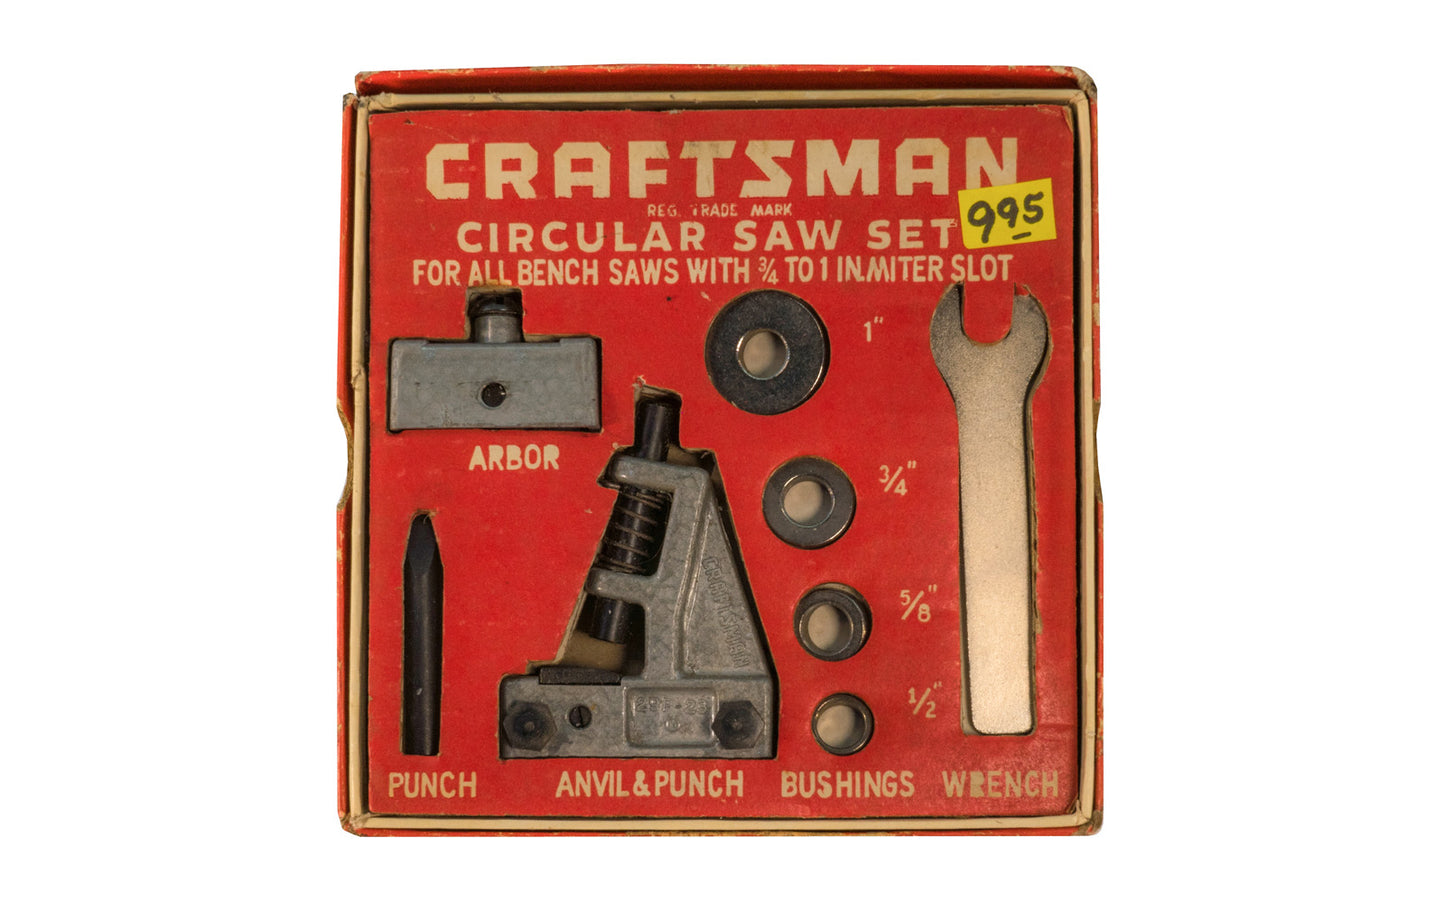 Craftsman Circular Saw Set for bench saw with 3/4" to 1" miter slot - Cat No. 9-3530. 